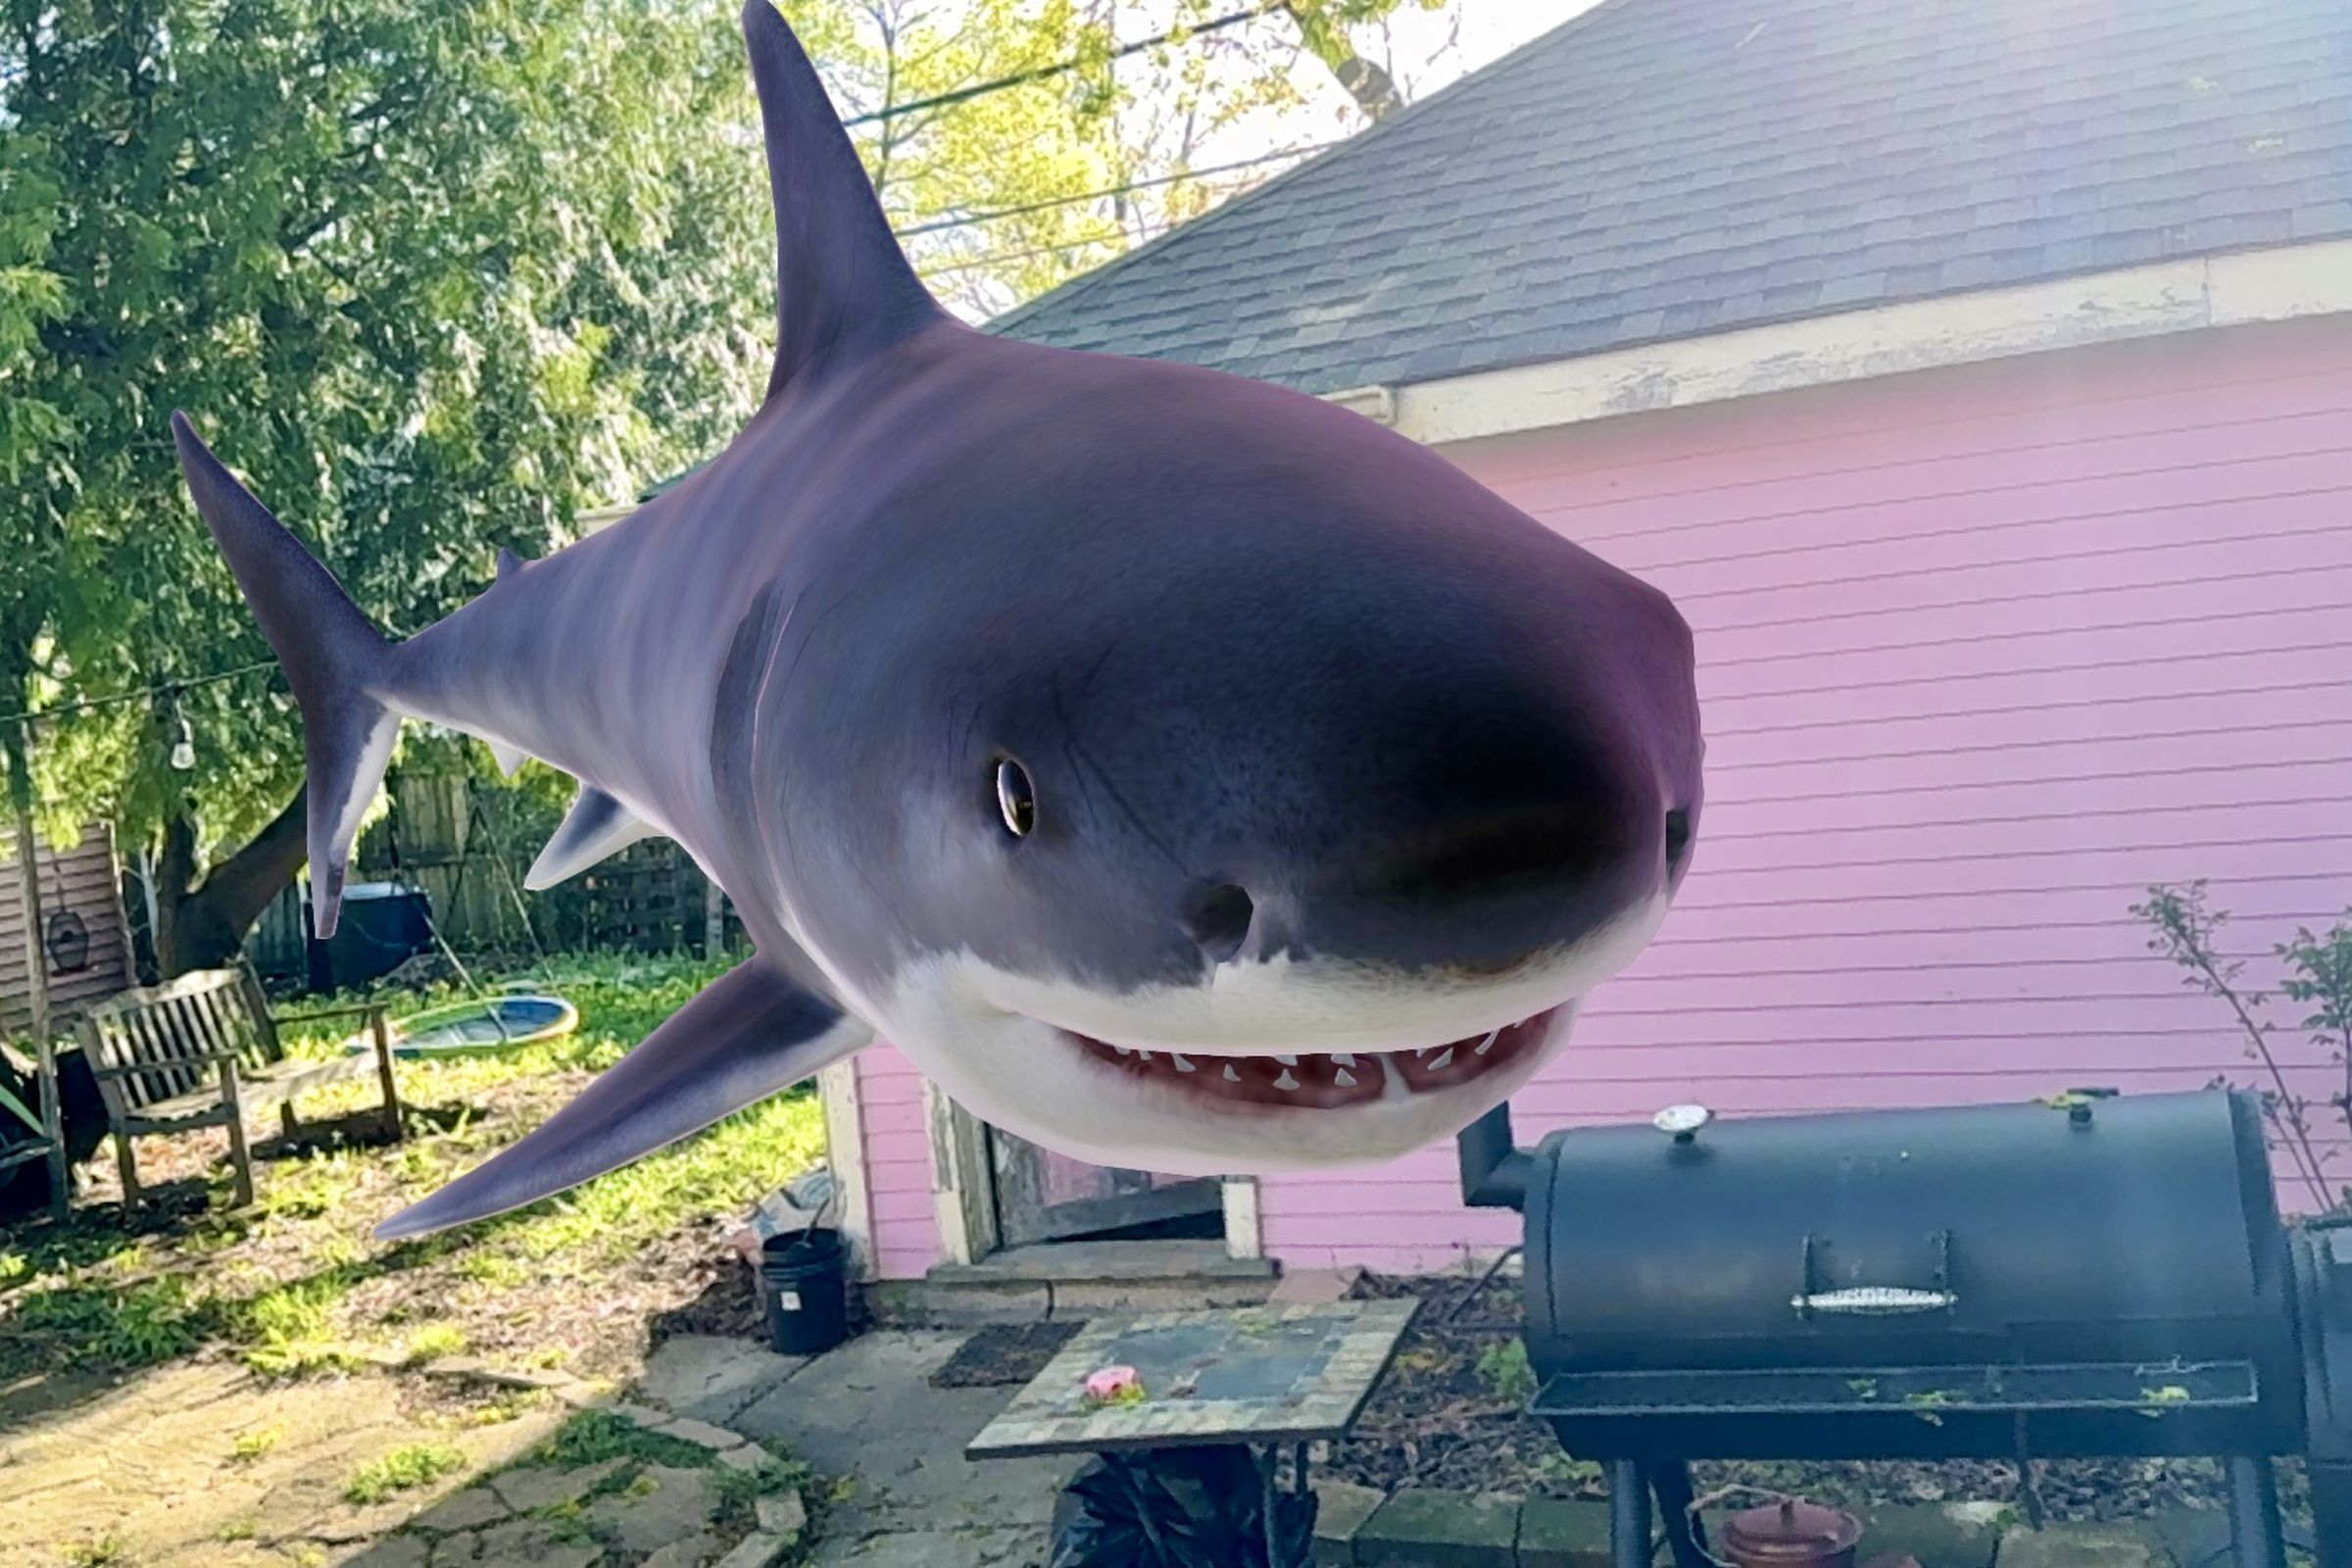 A Great White Shark floating above the ground in a backyard area.